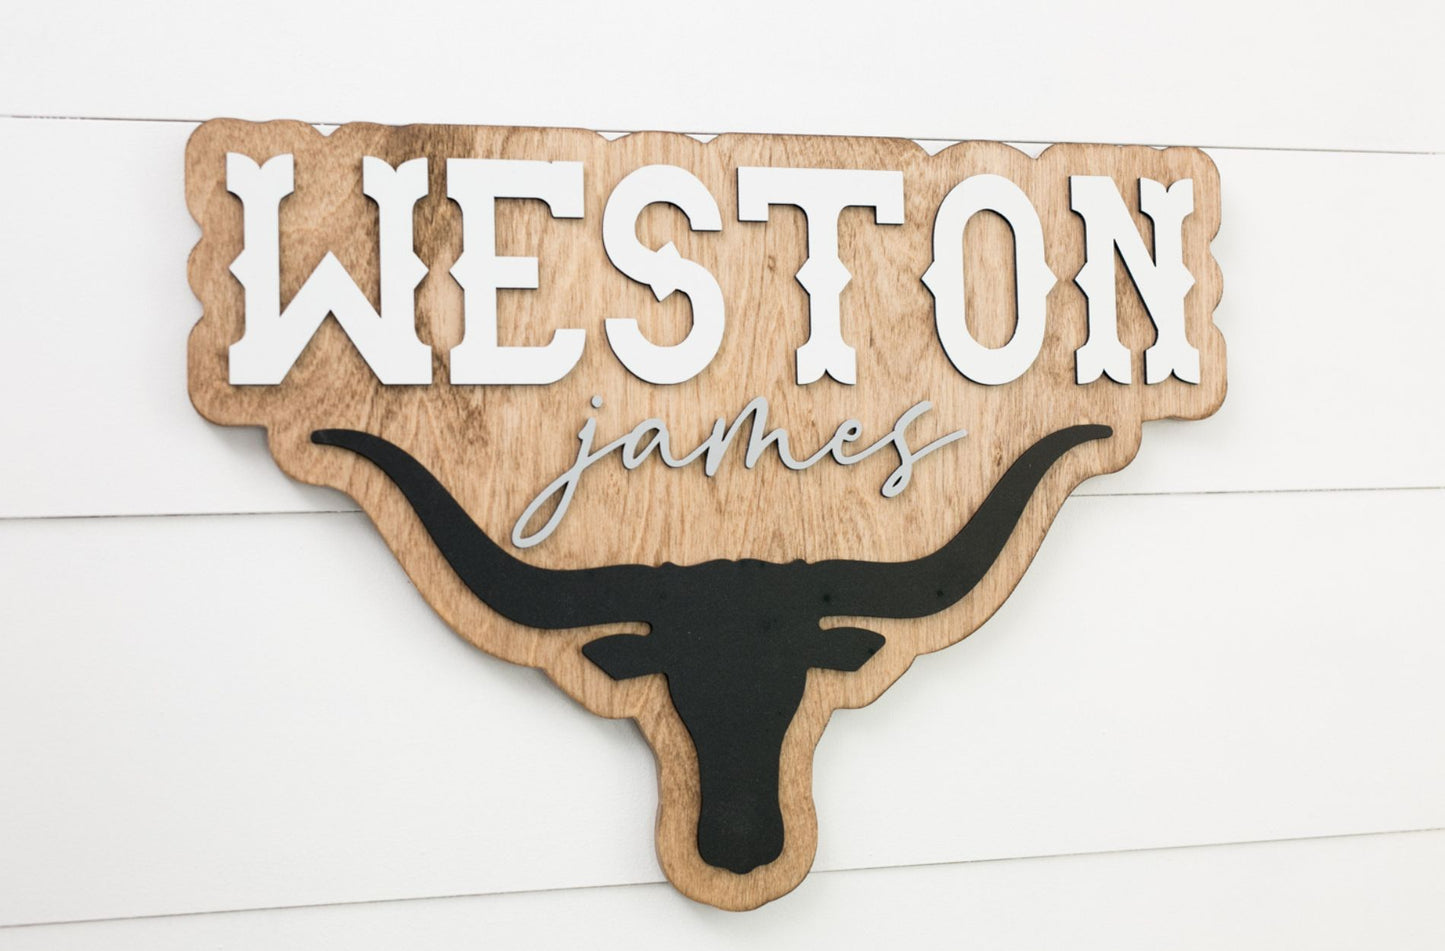 The Weston Bubble Wood Sign